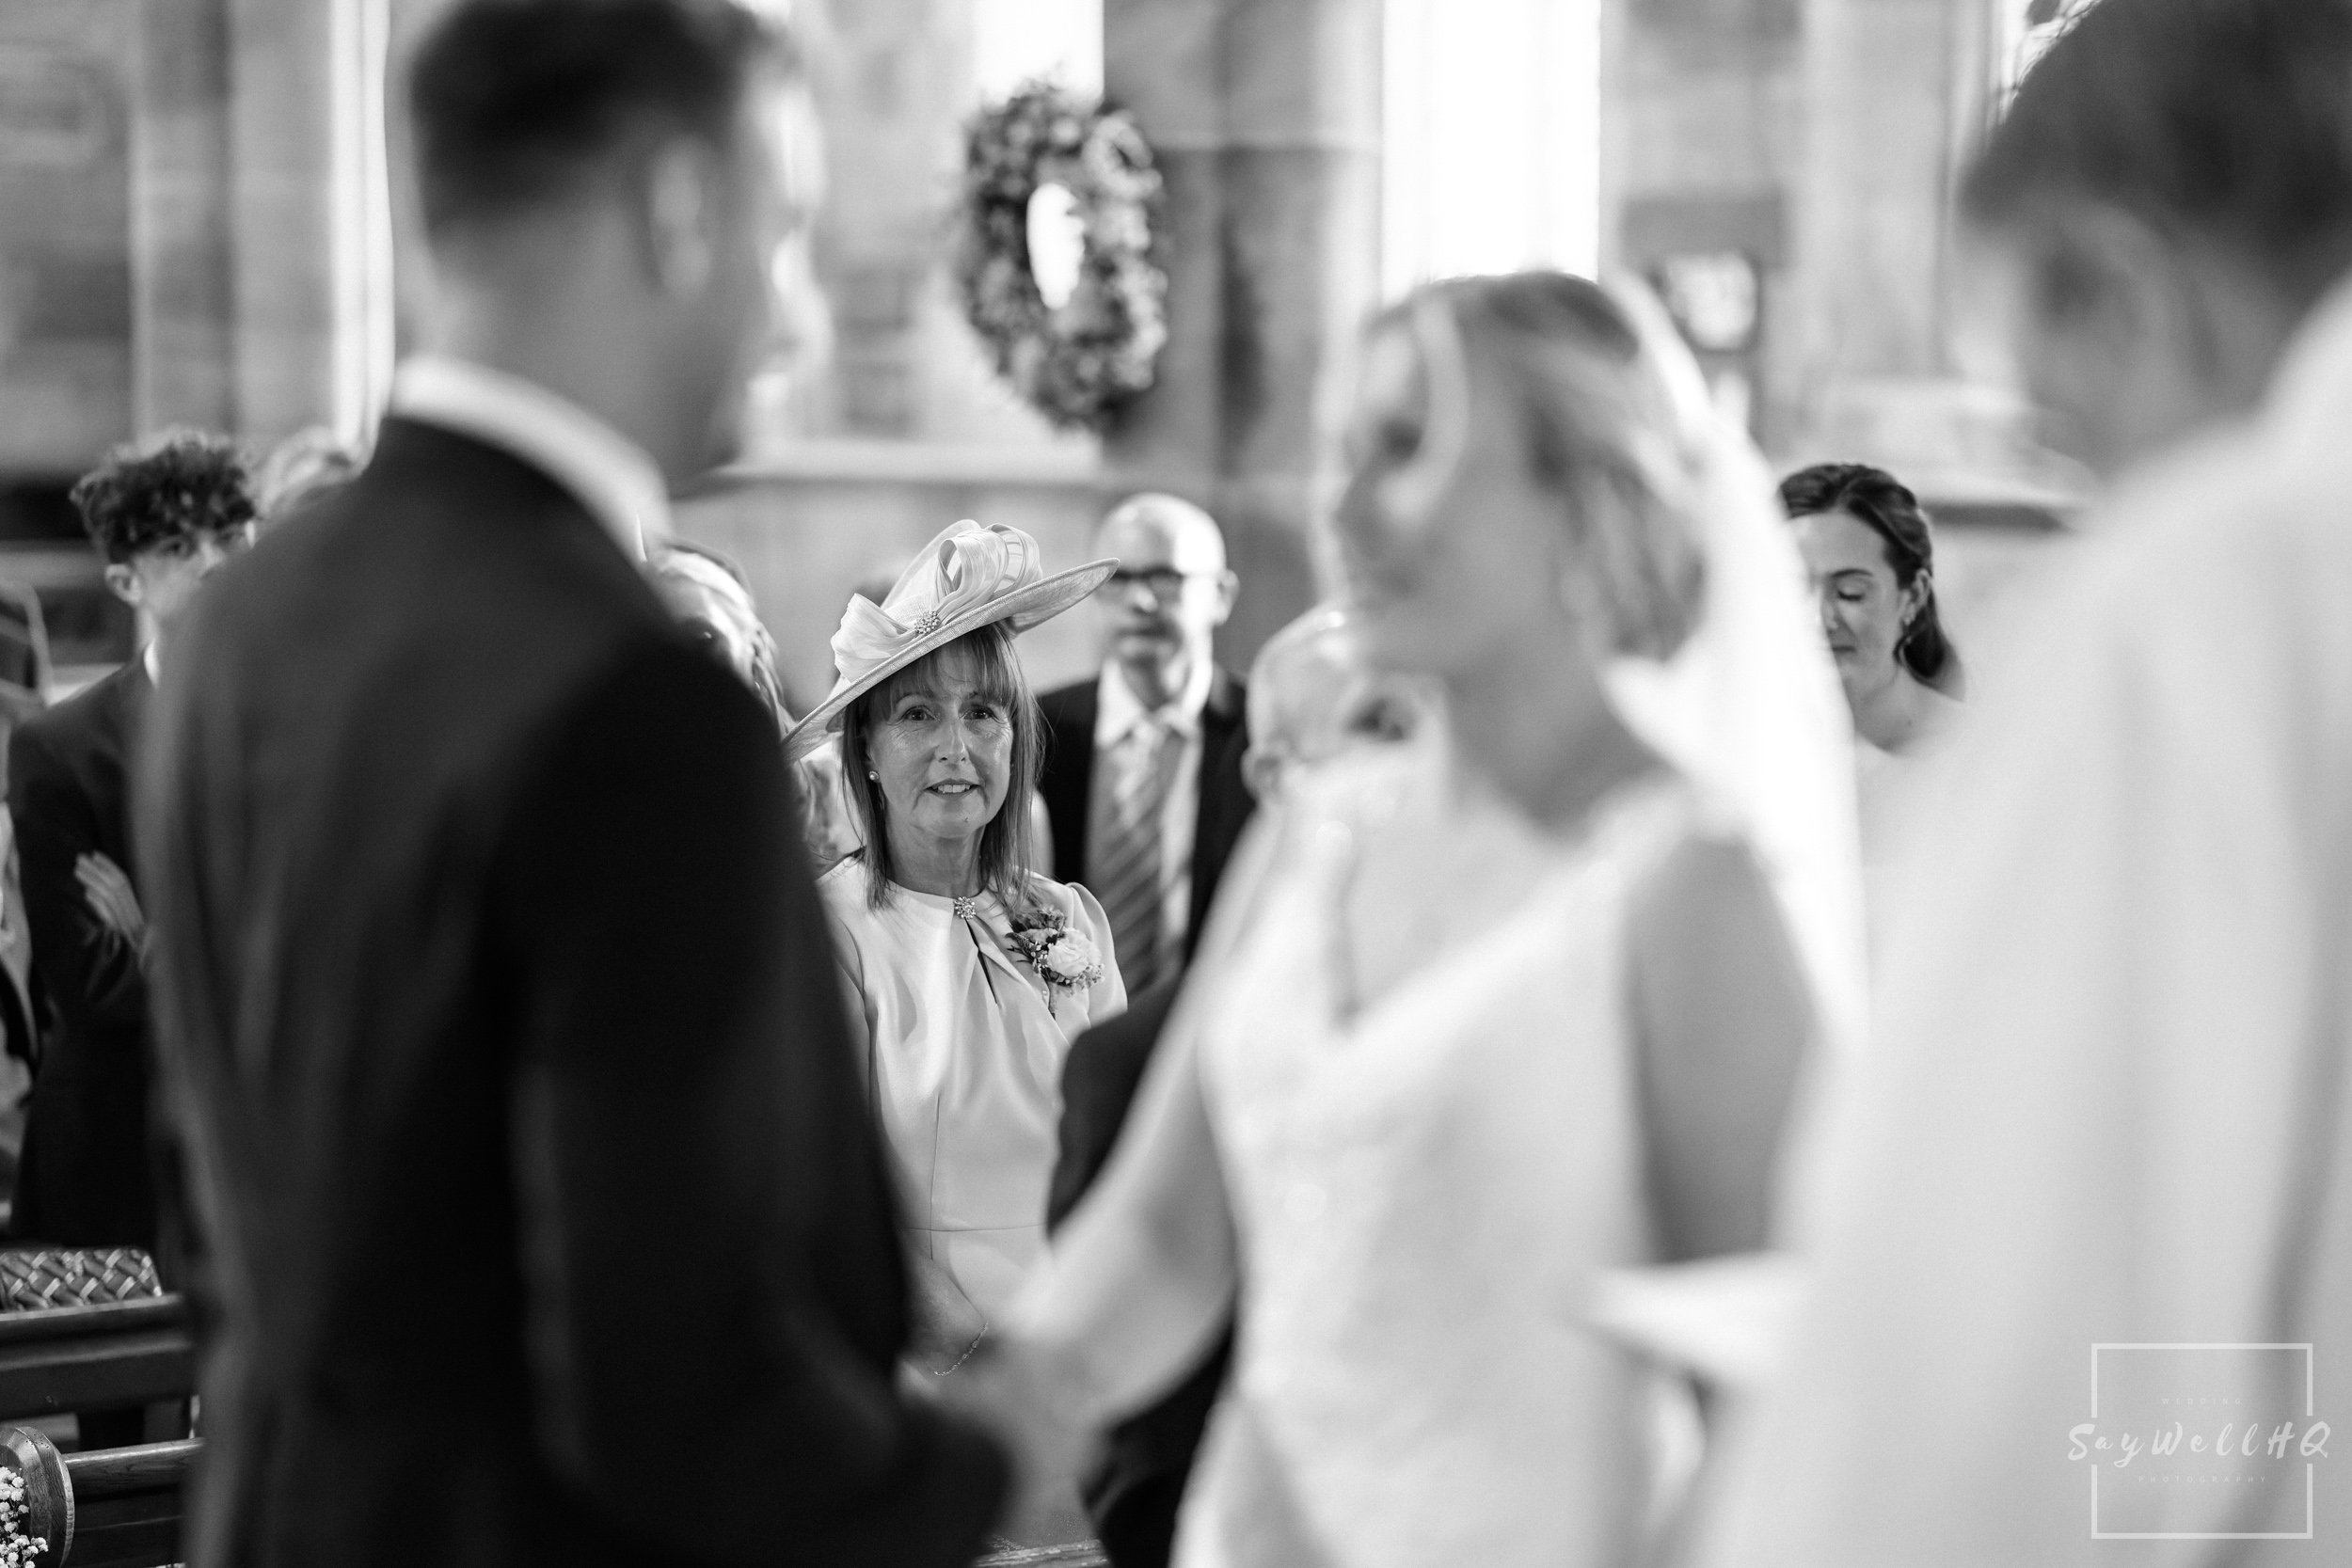 Sigma 85mm F1.4 DG DN for Wedding Photography | the brides mum looking at her daughter during the Church wedding ceremony